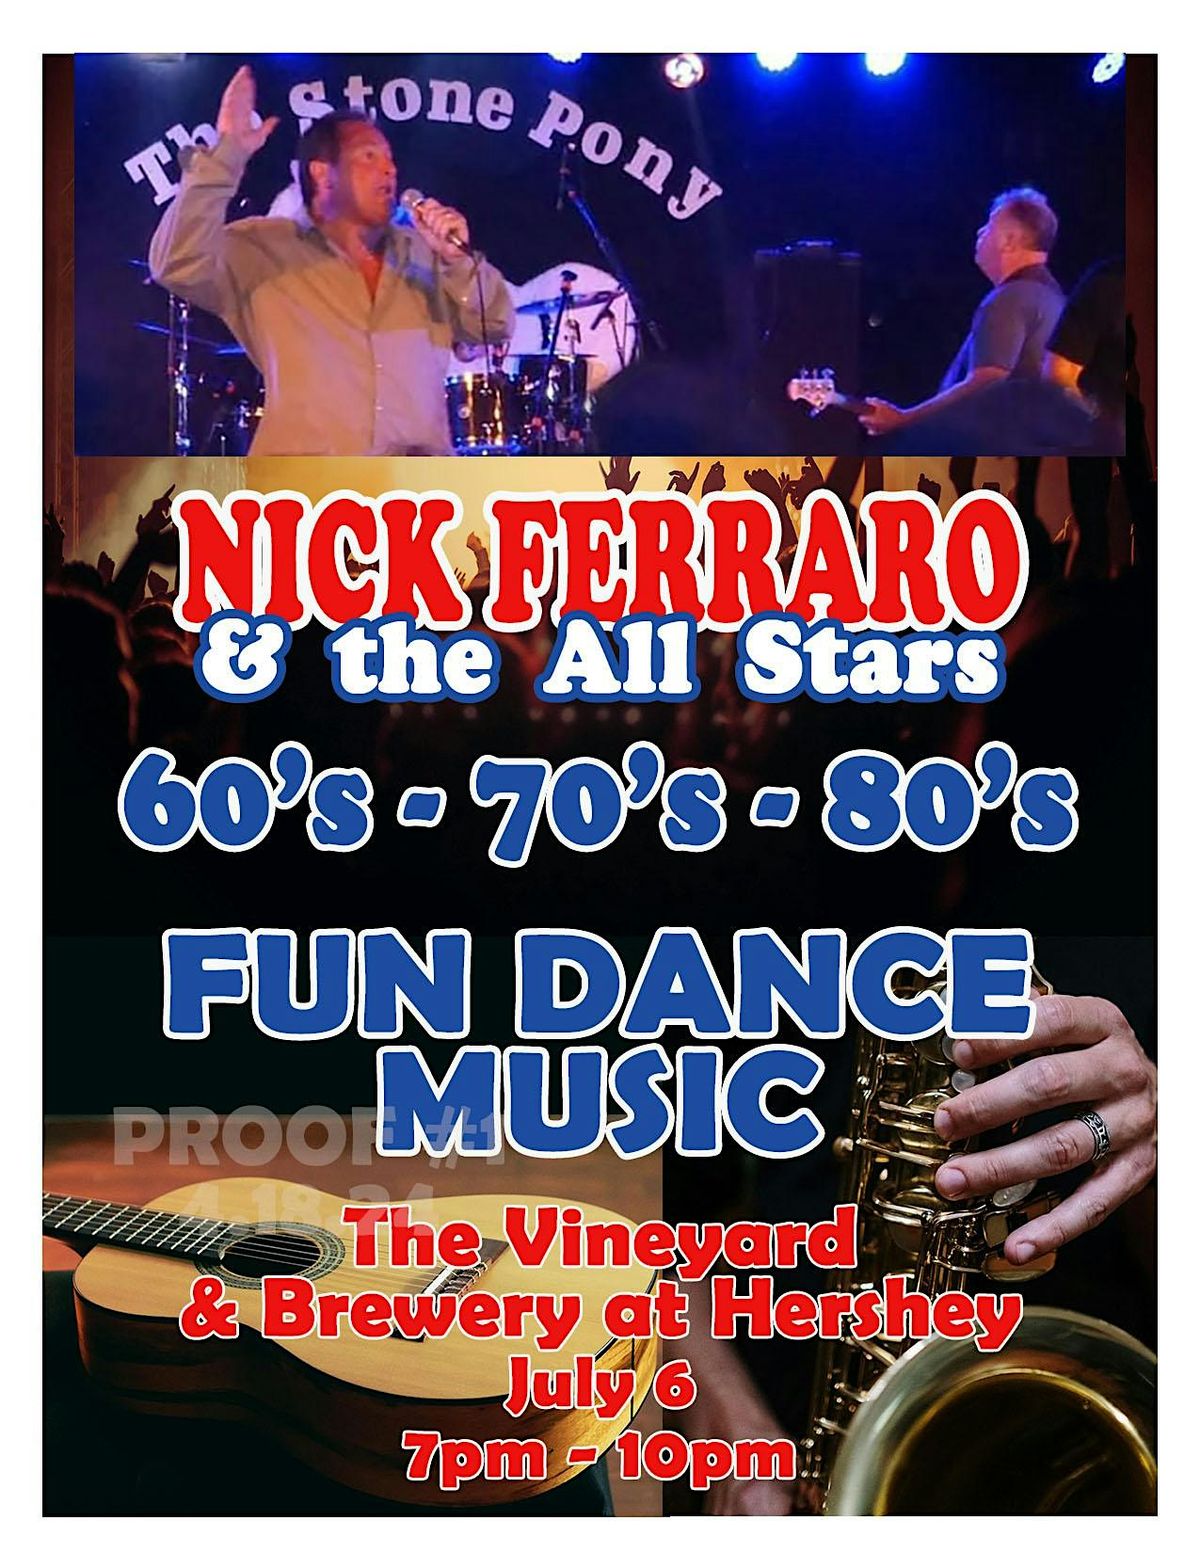 Free Live music with Nick Ferraro & the All Stars!